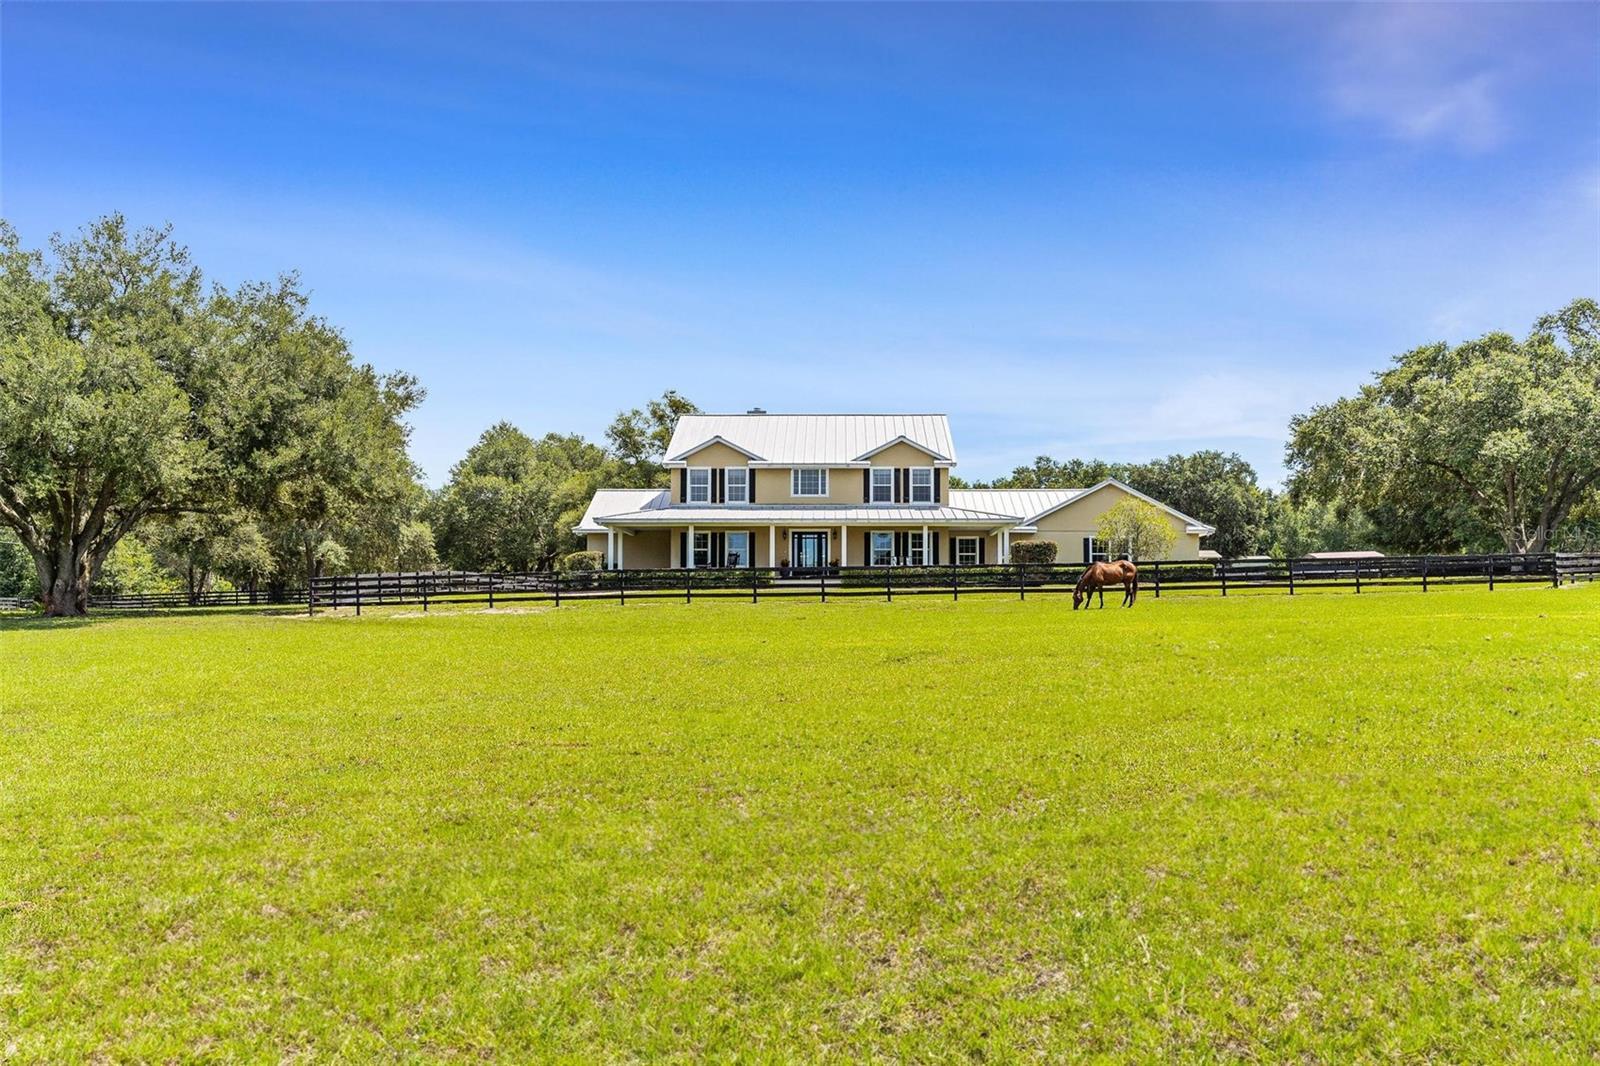 two story ranch home with large grass property